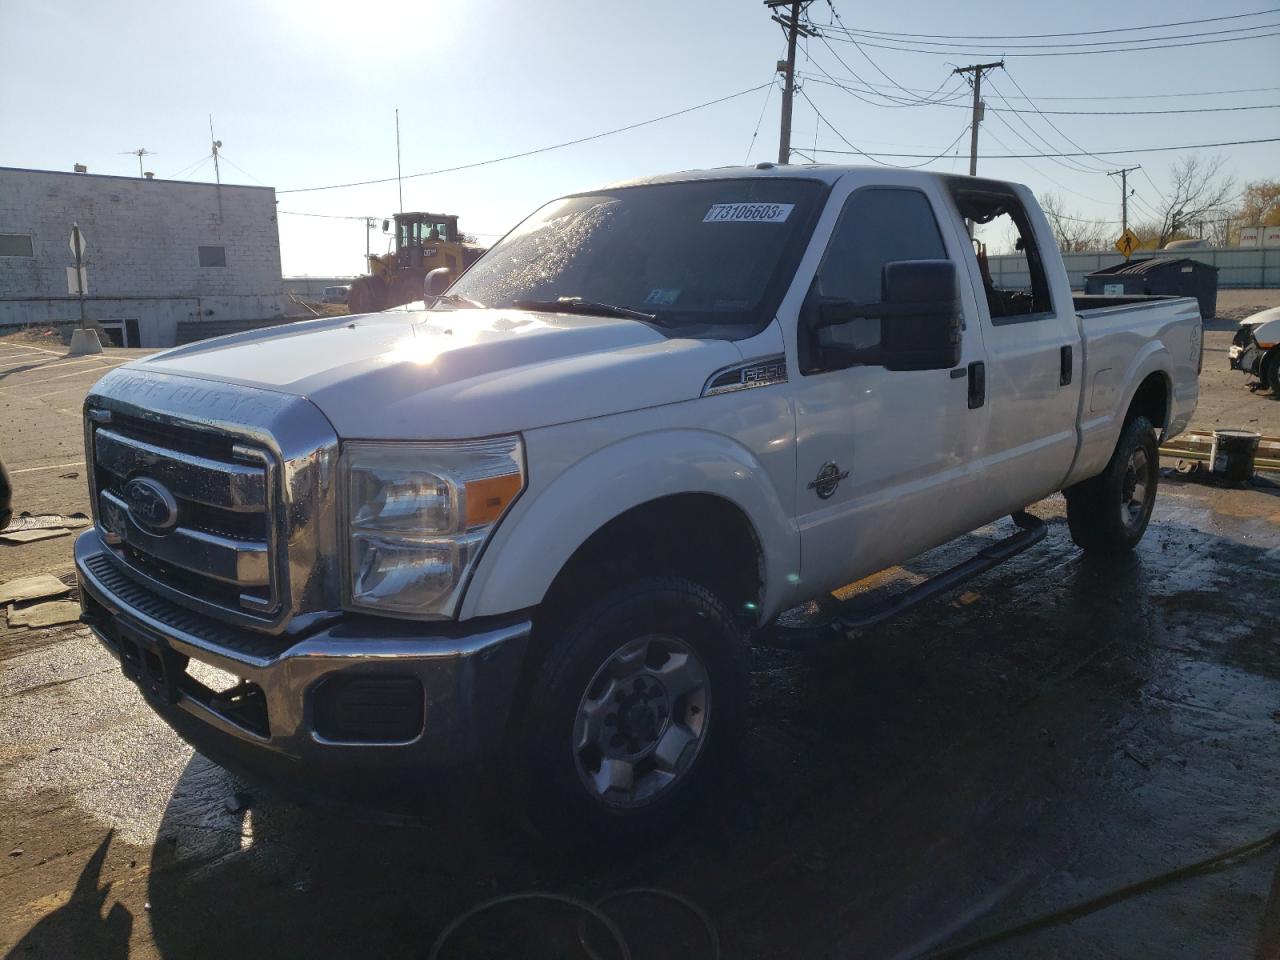 vin: 1FT7W2BT2BEA62568 1FT7W2BT2BEA62568 2011 ford f250 6700 for Sale in 60411 5546, Il - Chicago South, Chicago Heights, Illinois, USA